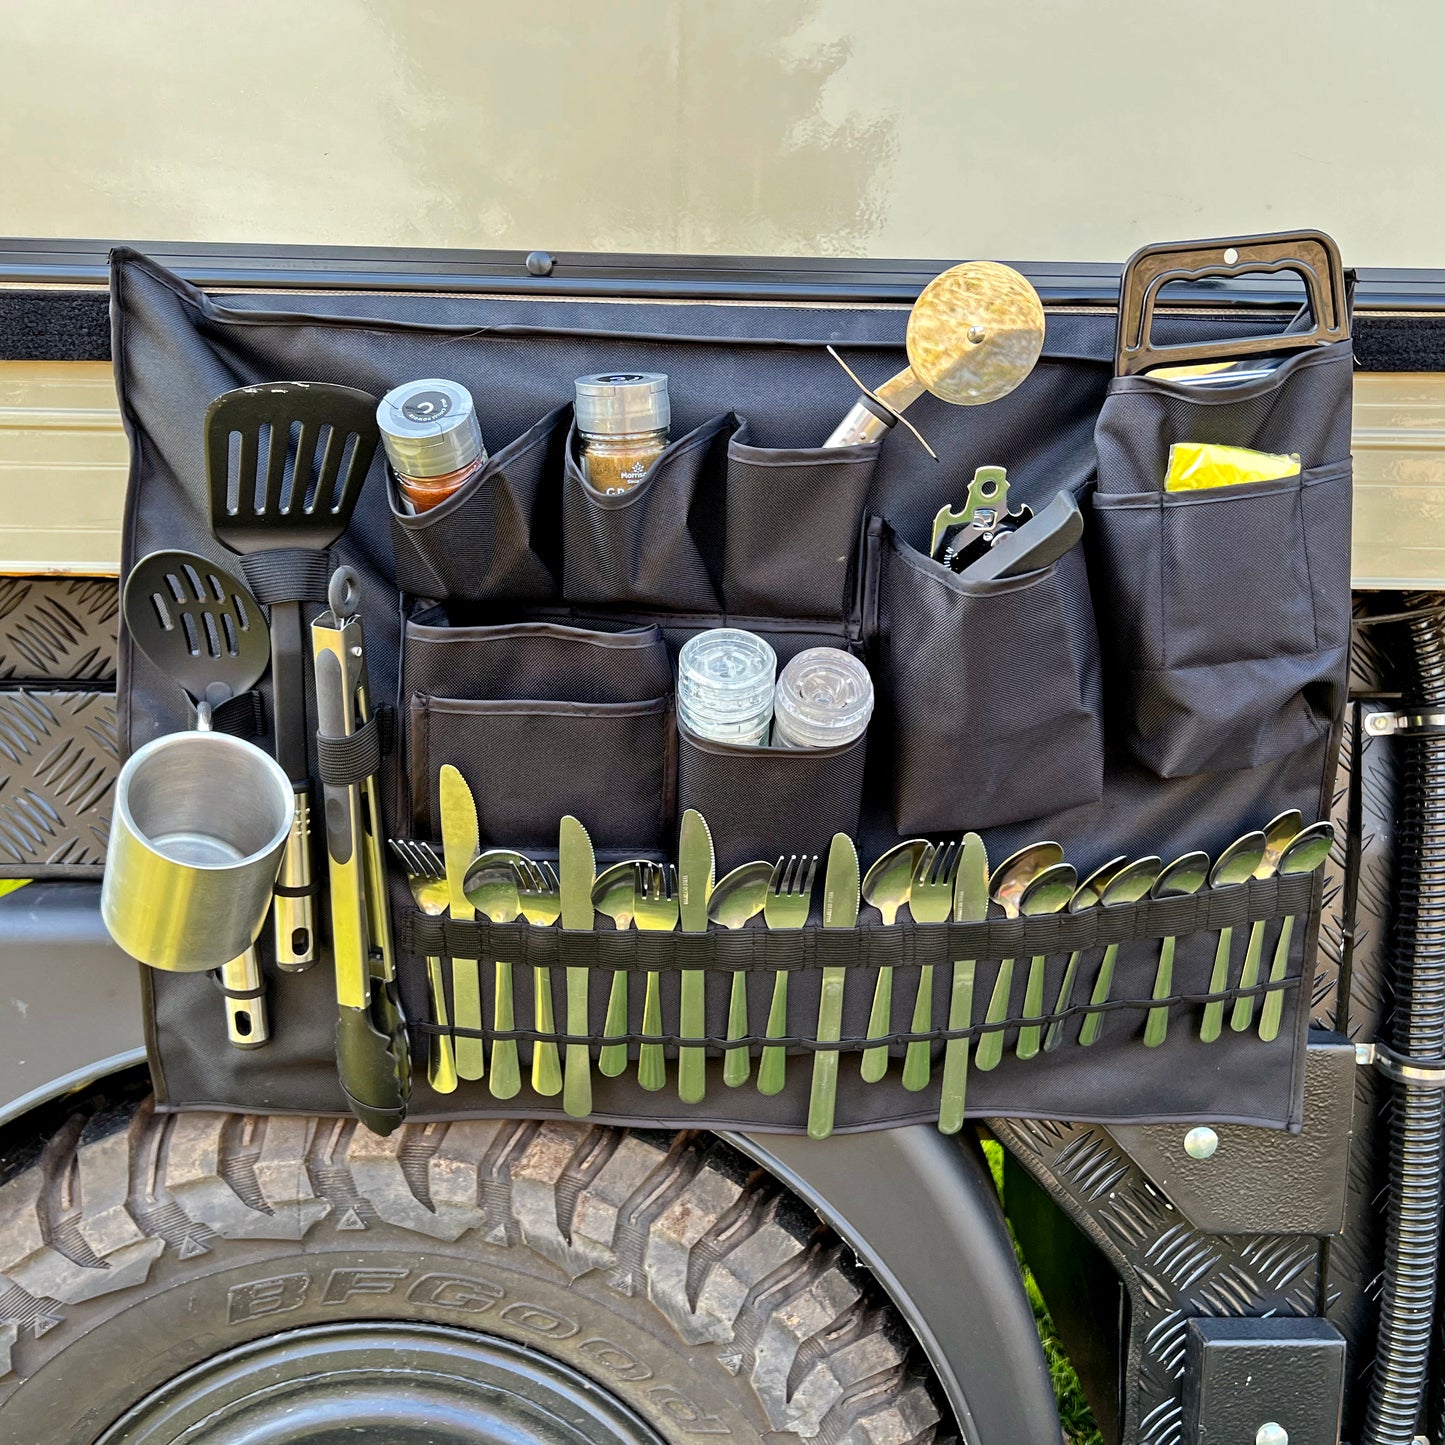 Multi Way Storage Organisers - The Campfire Cook's